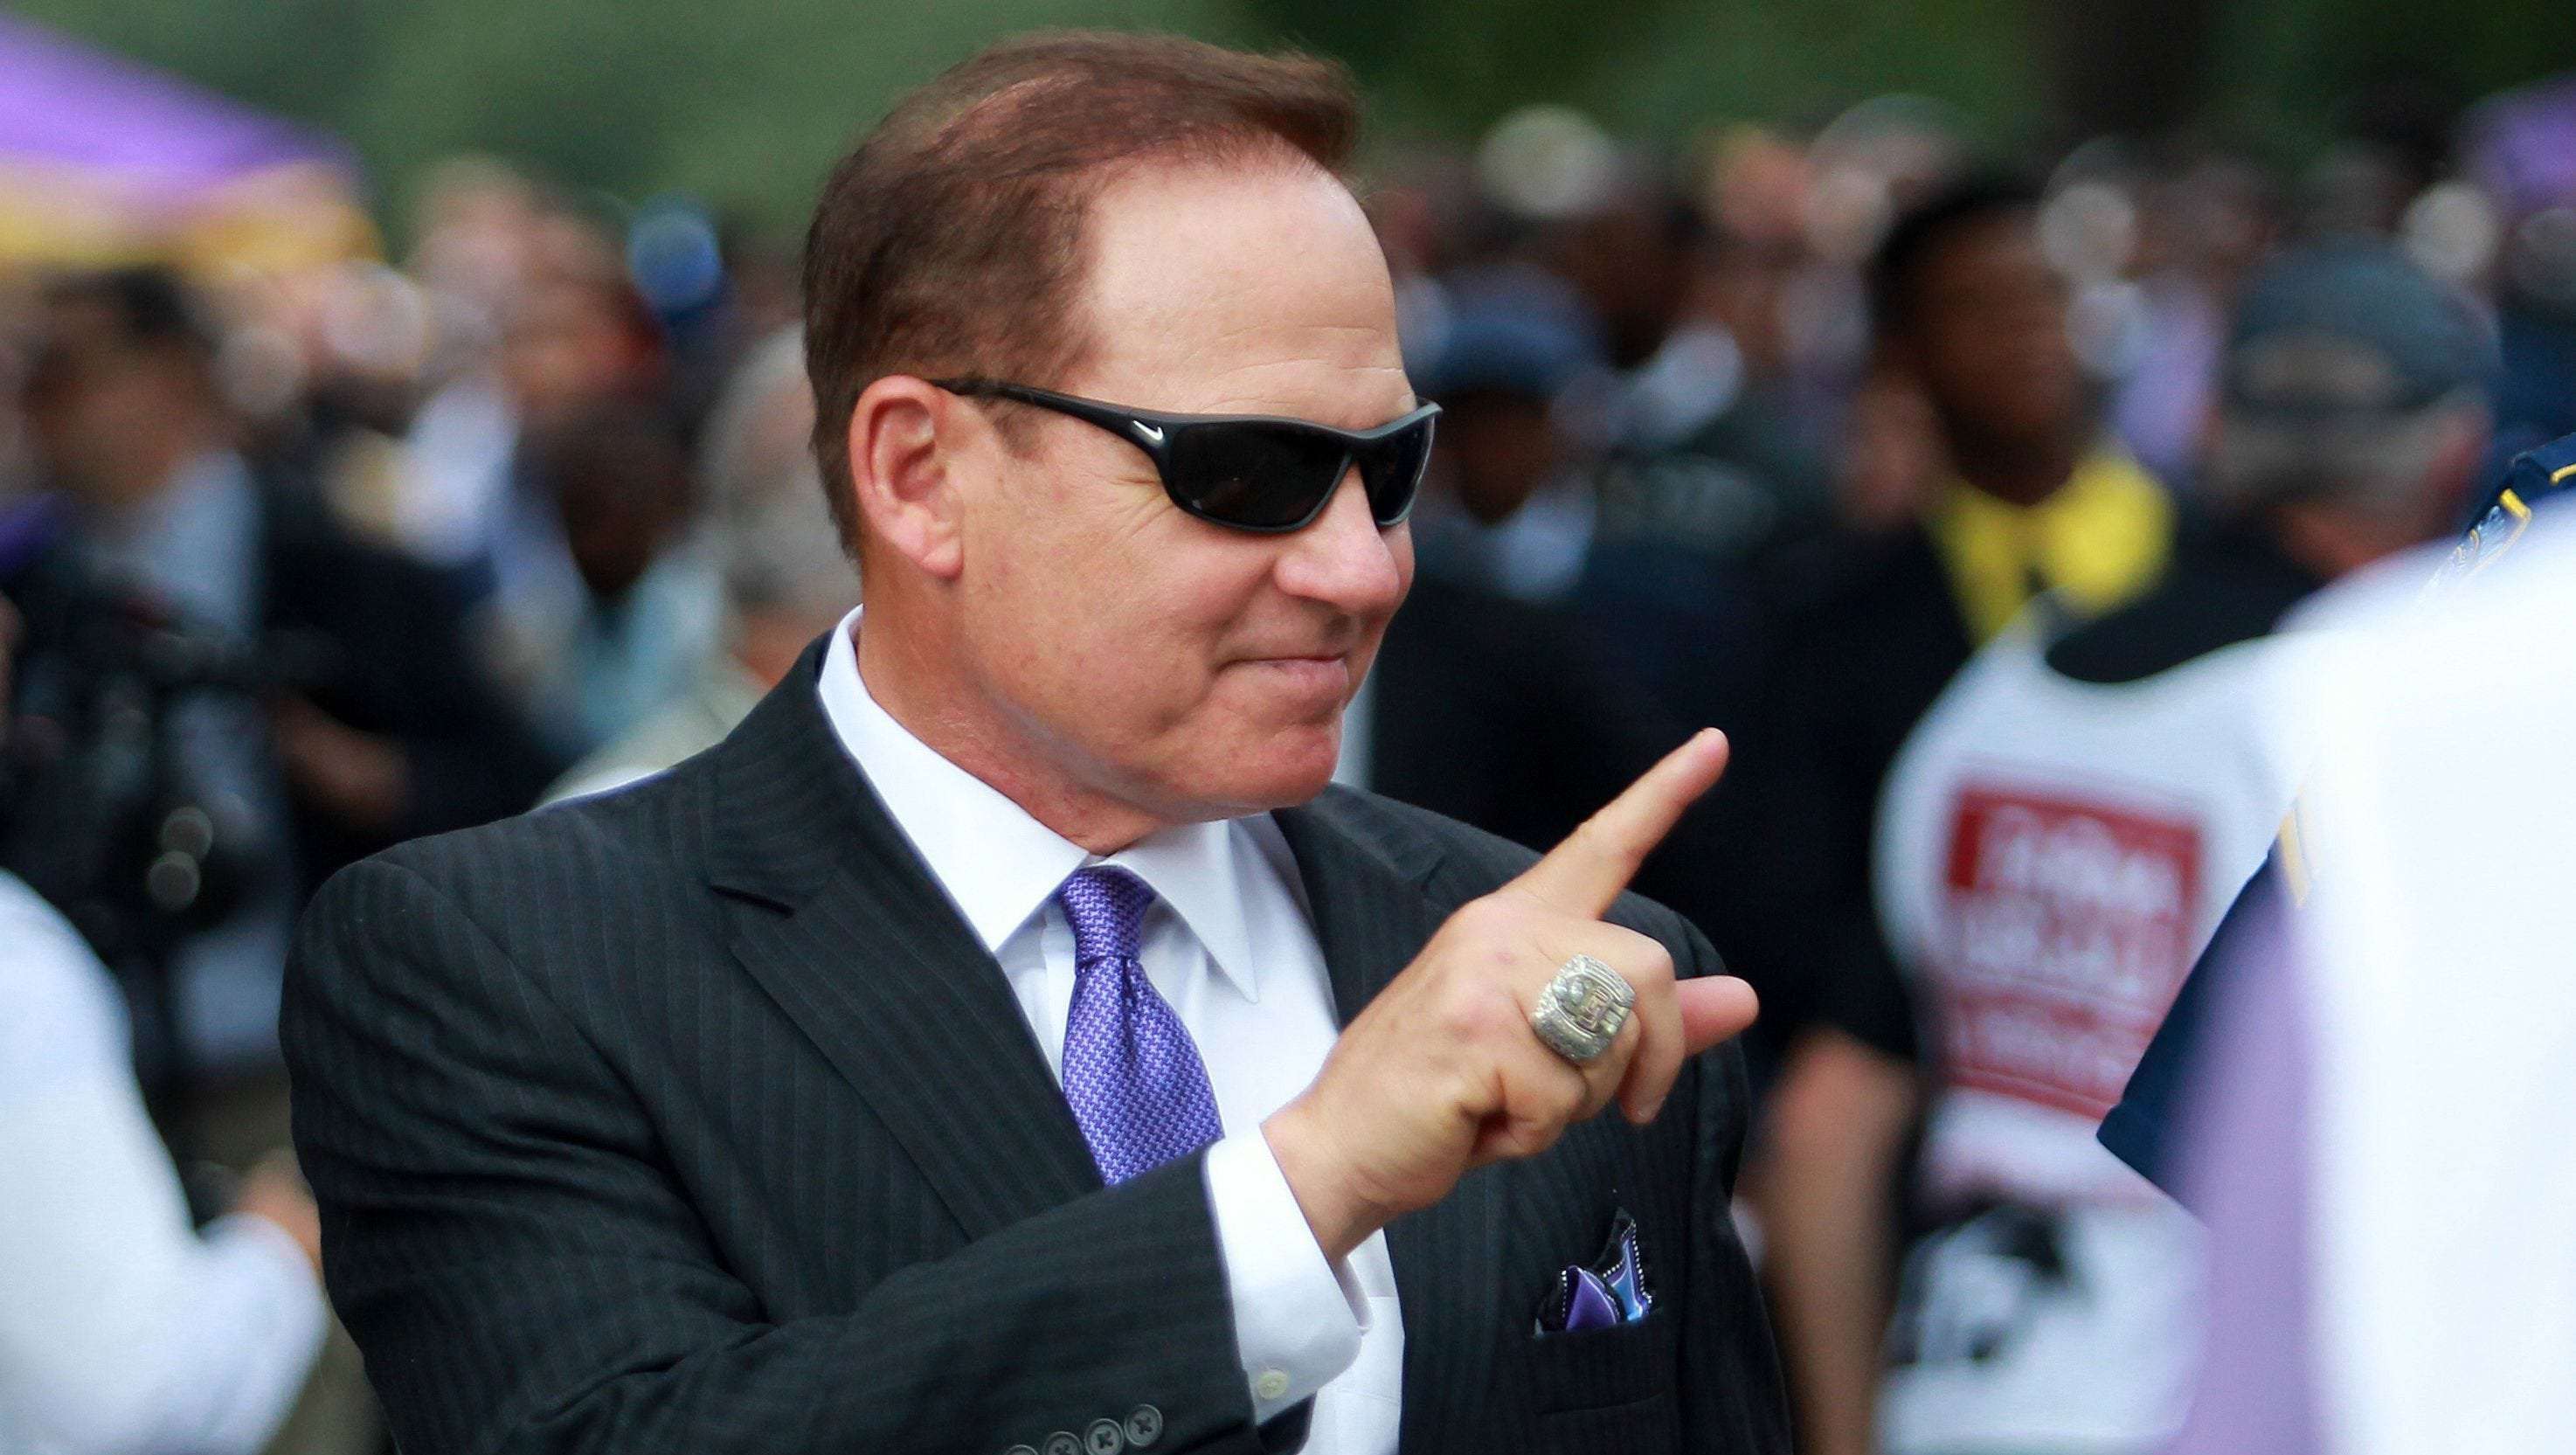 image for Former LSU football coach Les Miles was banned from contacting female students after 2013 probe